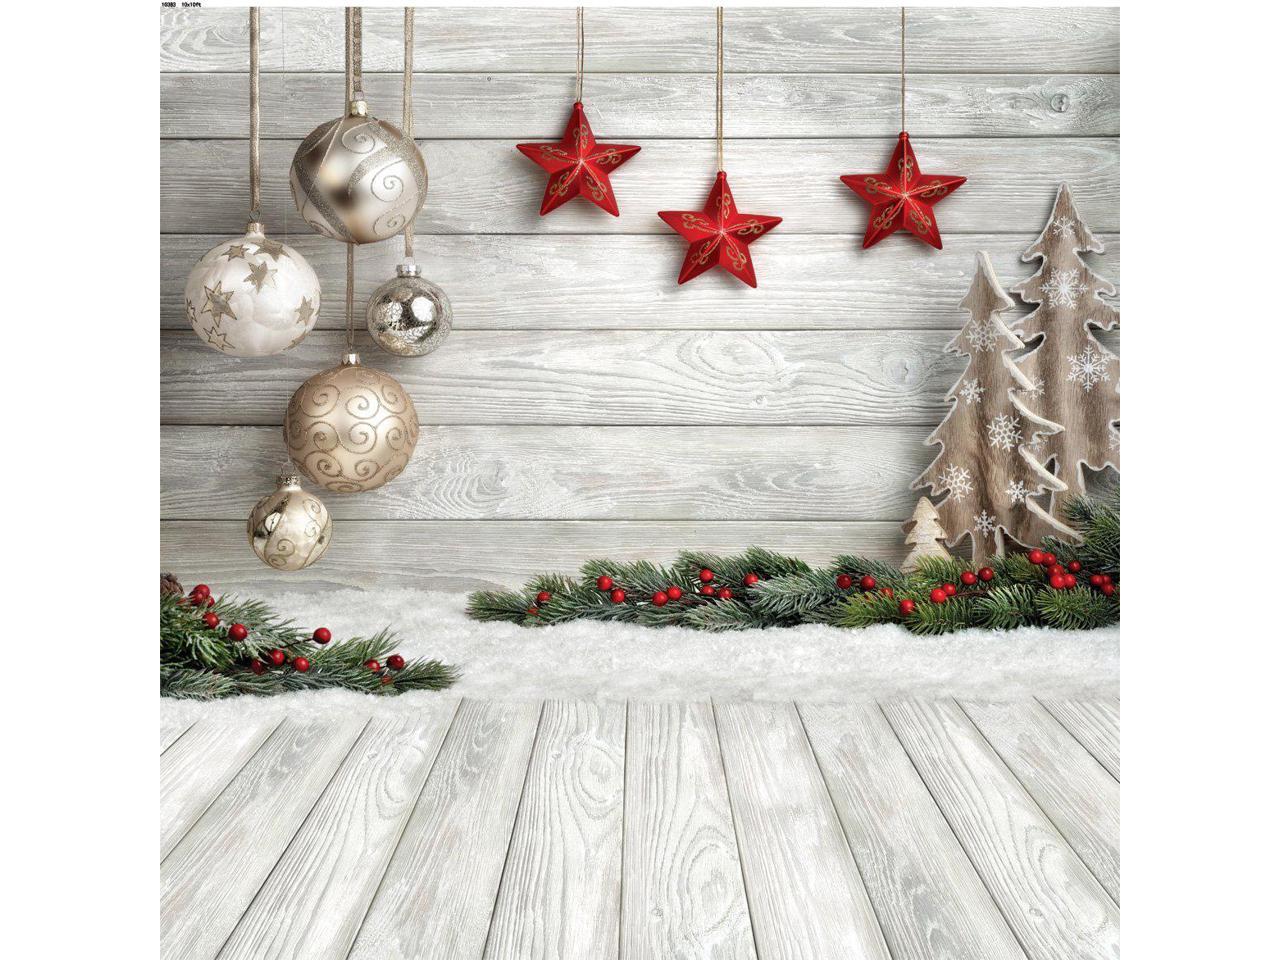 10x10 ft Light Brown Wood Floor and Wall Photo Backgrounds no Wrinkle Christmas Photography Backdrops for Wedding 